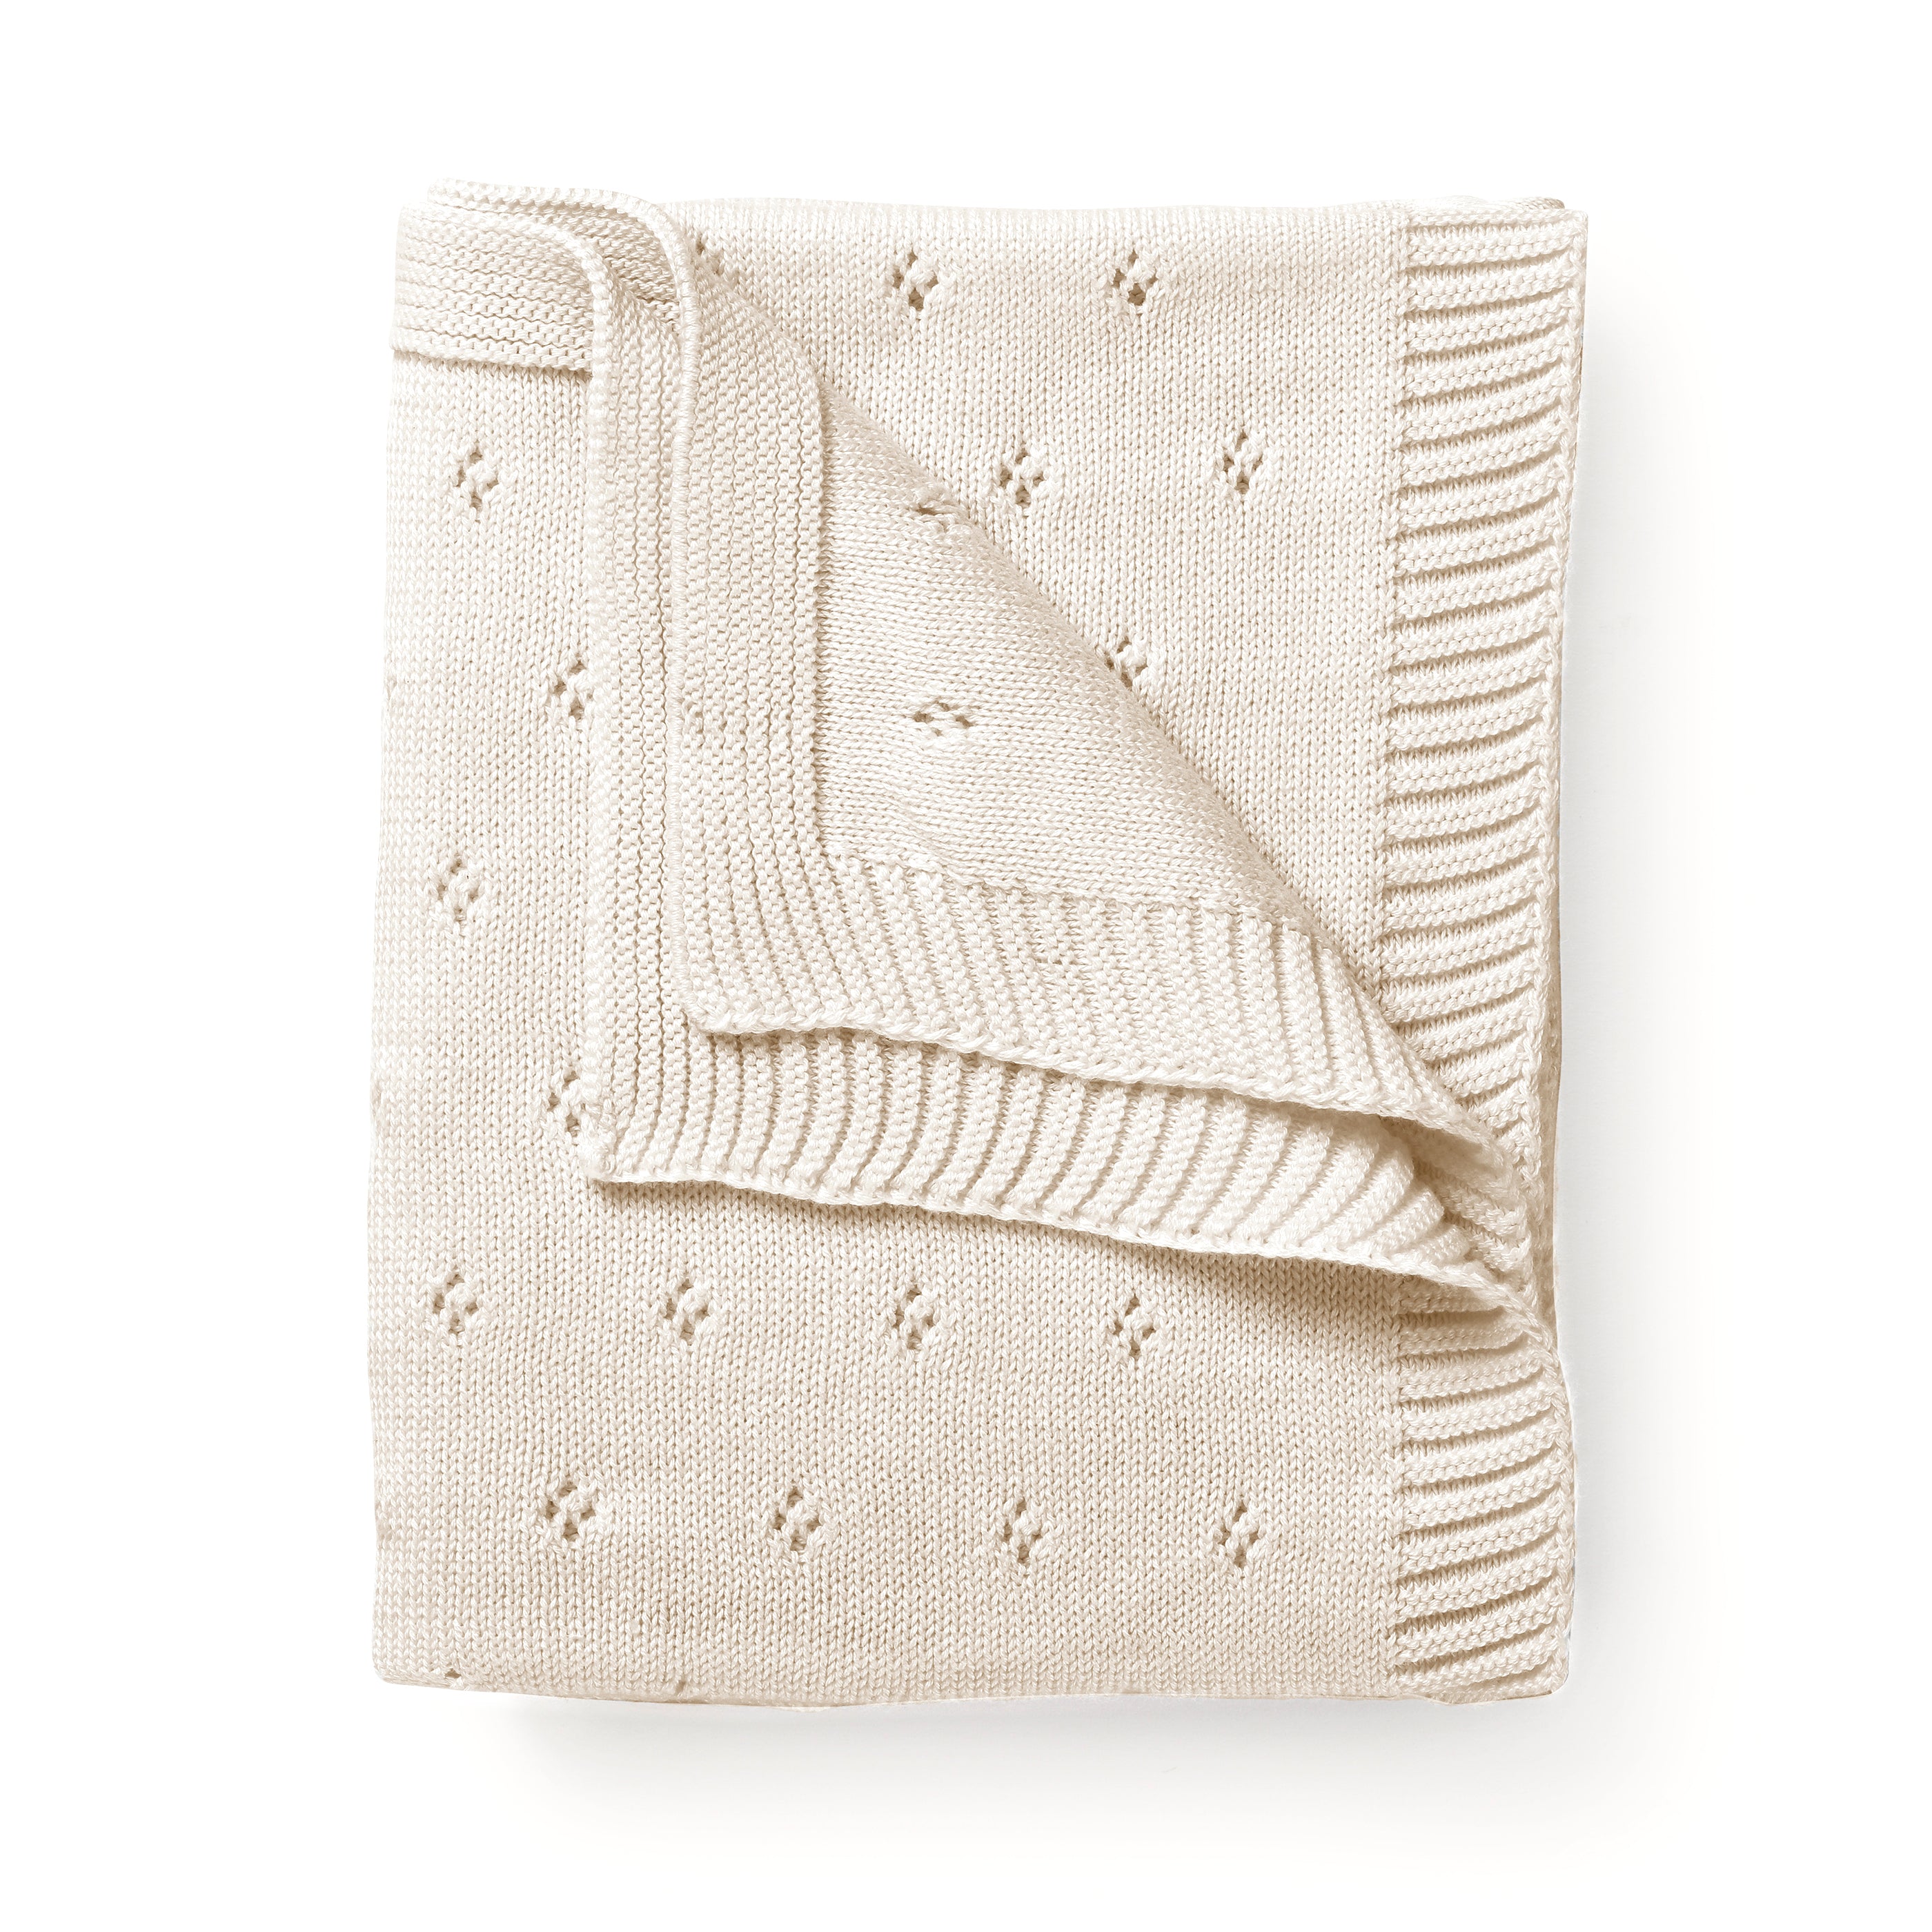 A Organic Cotton Pointelle Baby Blanket in Vanilla Natural from Makemake Organics, with a textured border and small, evenly spaced embroidered flowers, neatly folded on a white background.